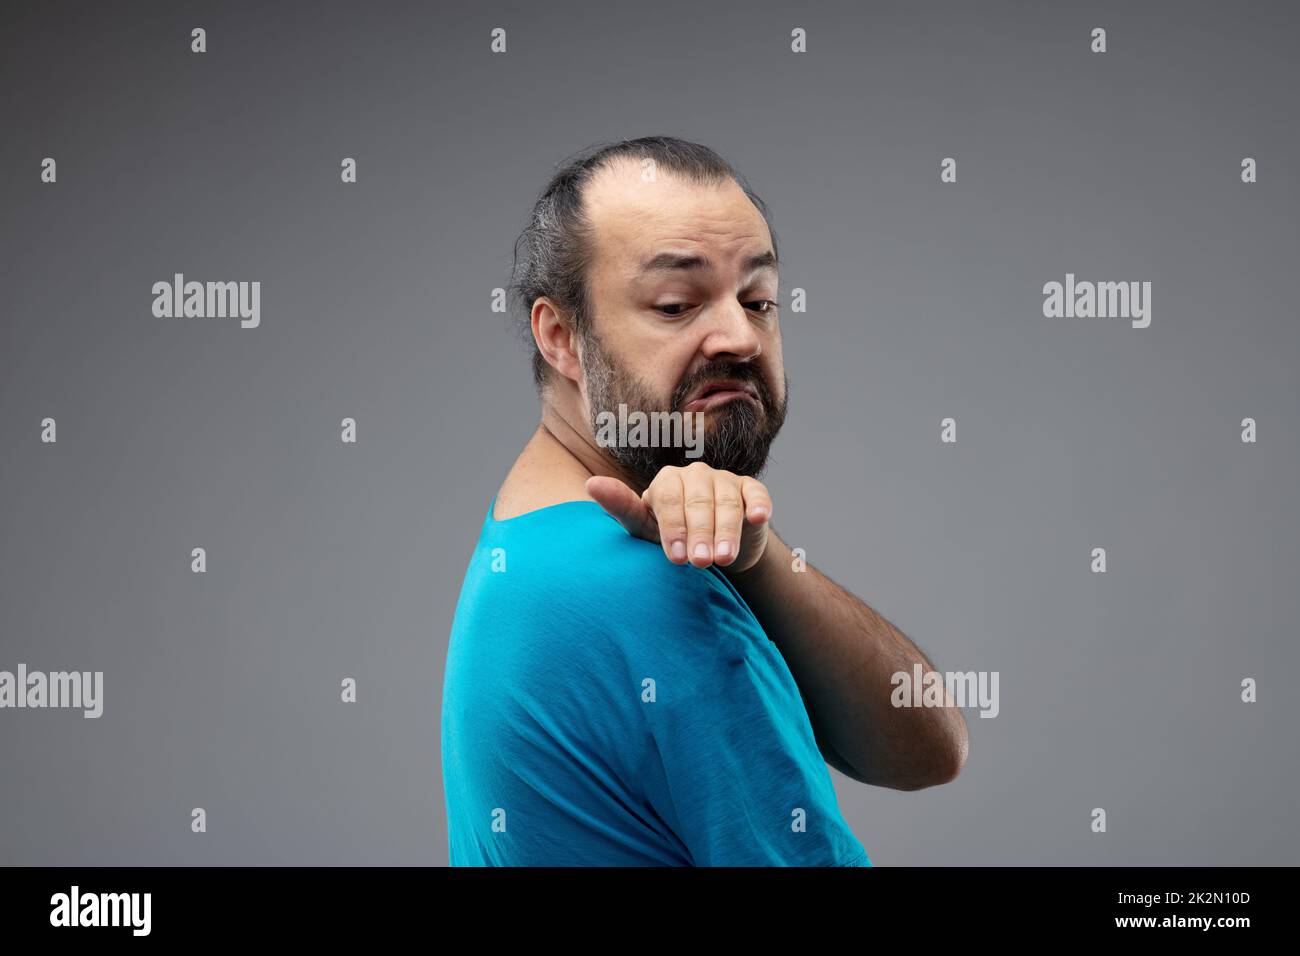 Man with grimace of disgust brushing shoulder Stock Photo